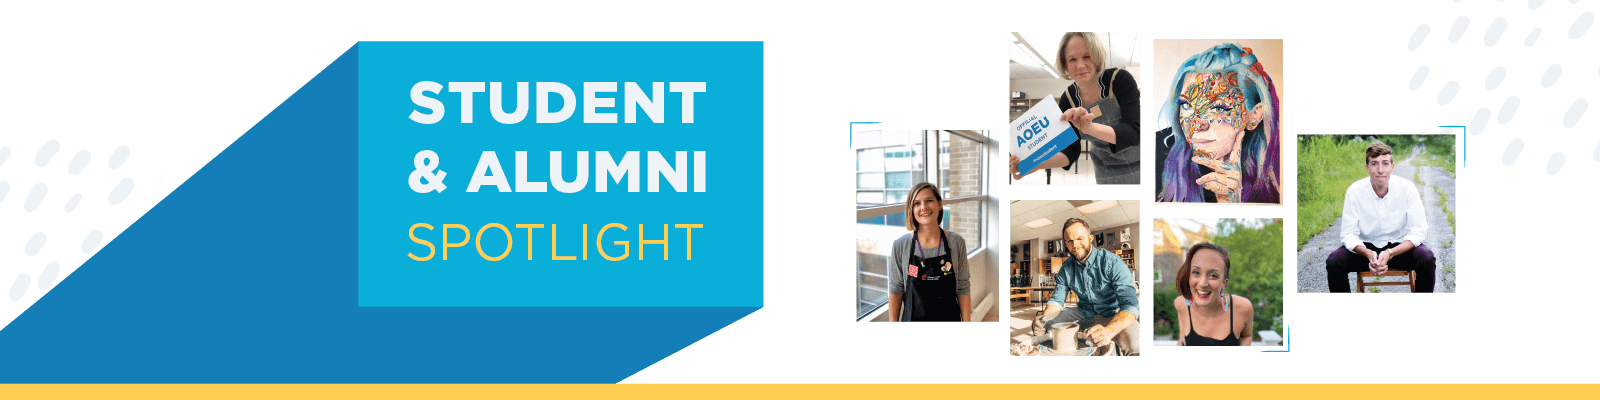 Student and Alumni Spotlight with images of AOEU students and alumno